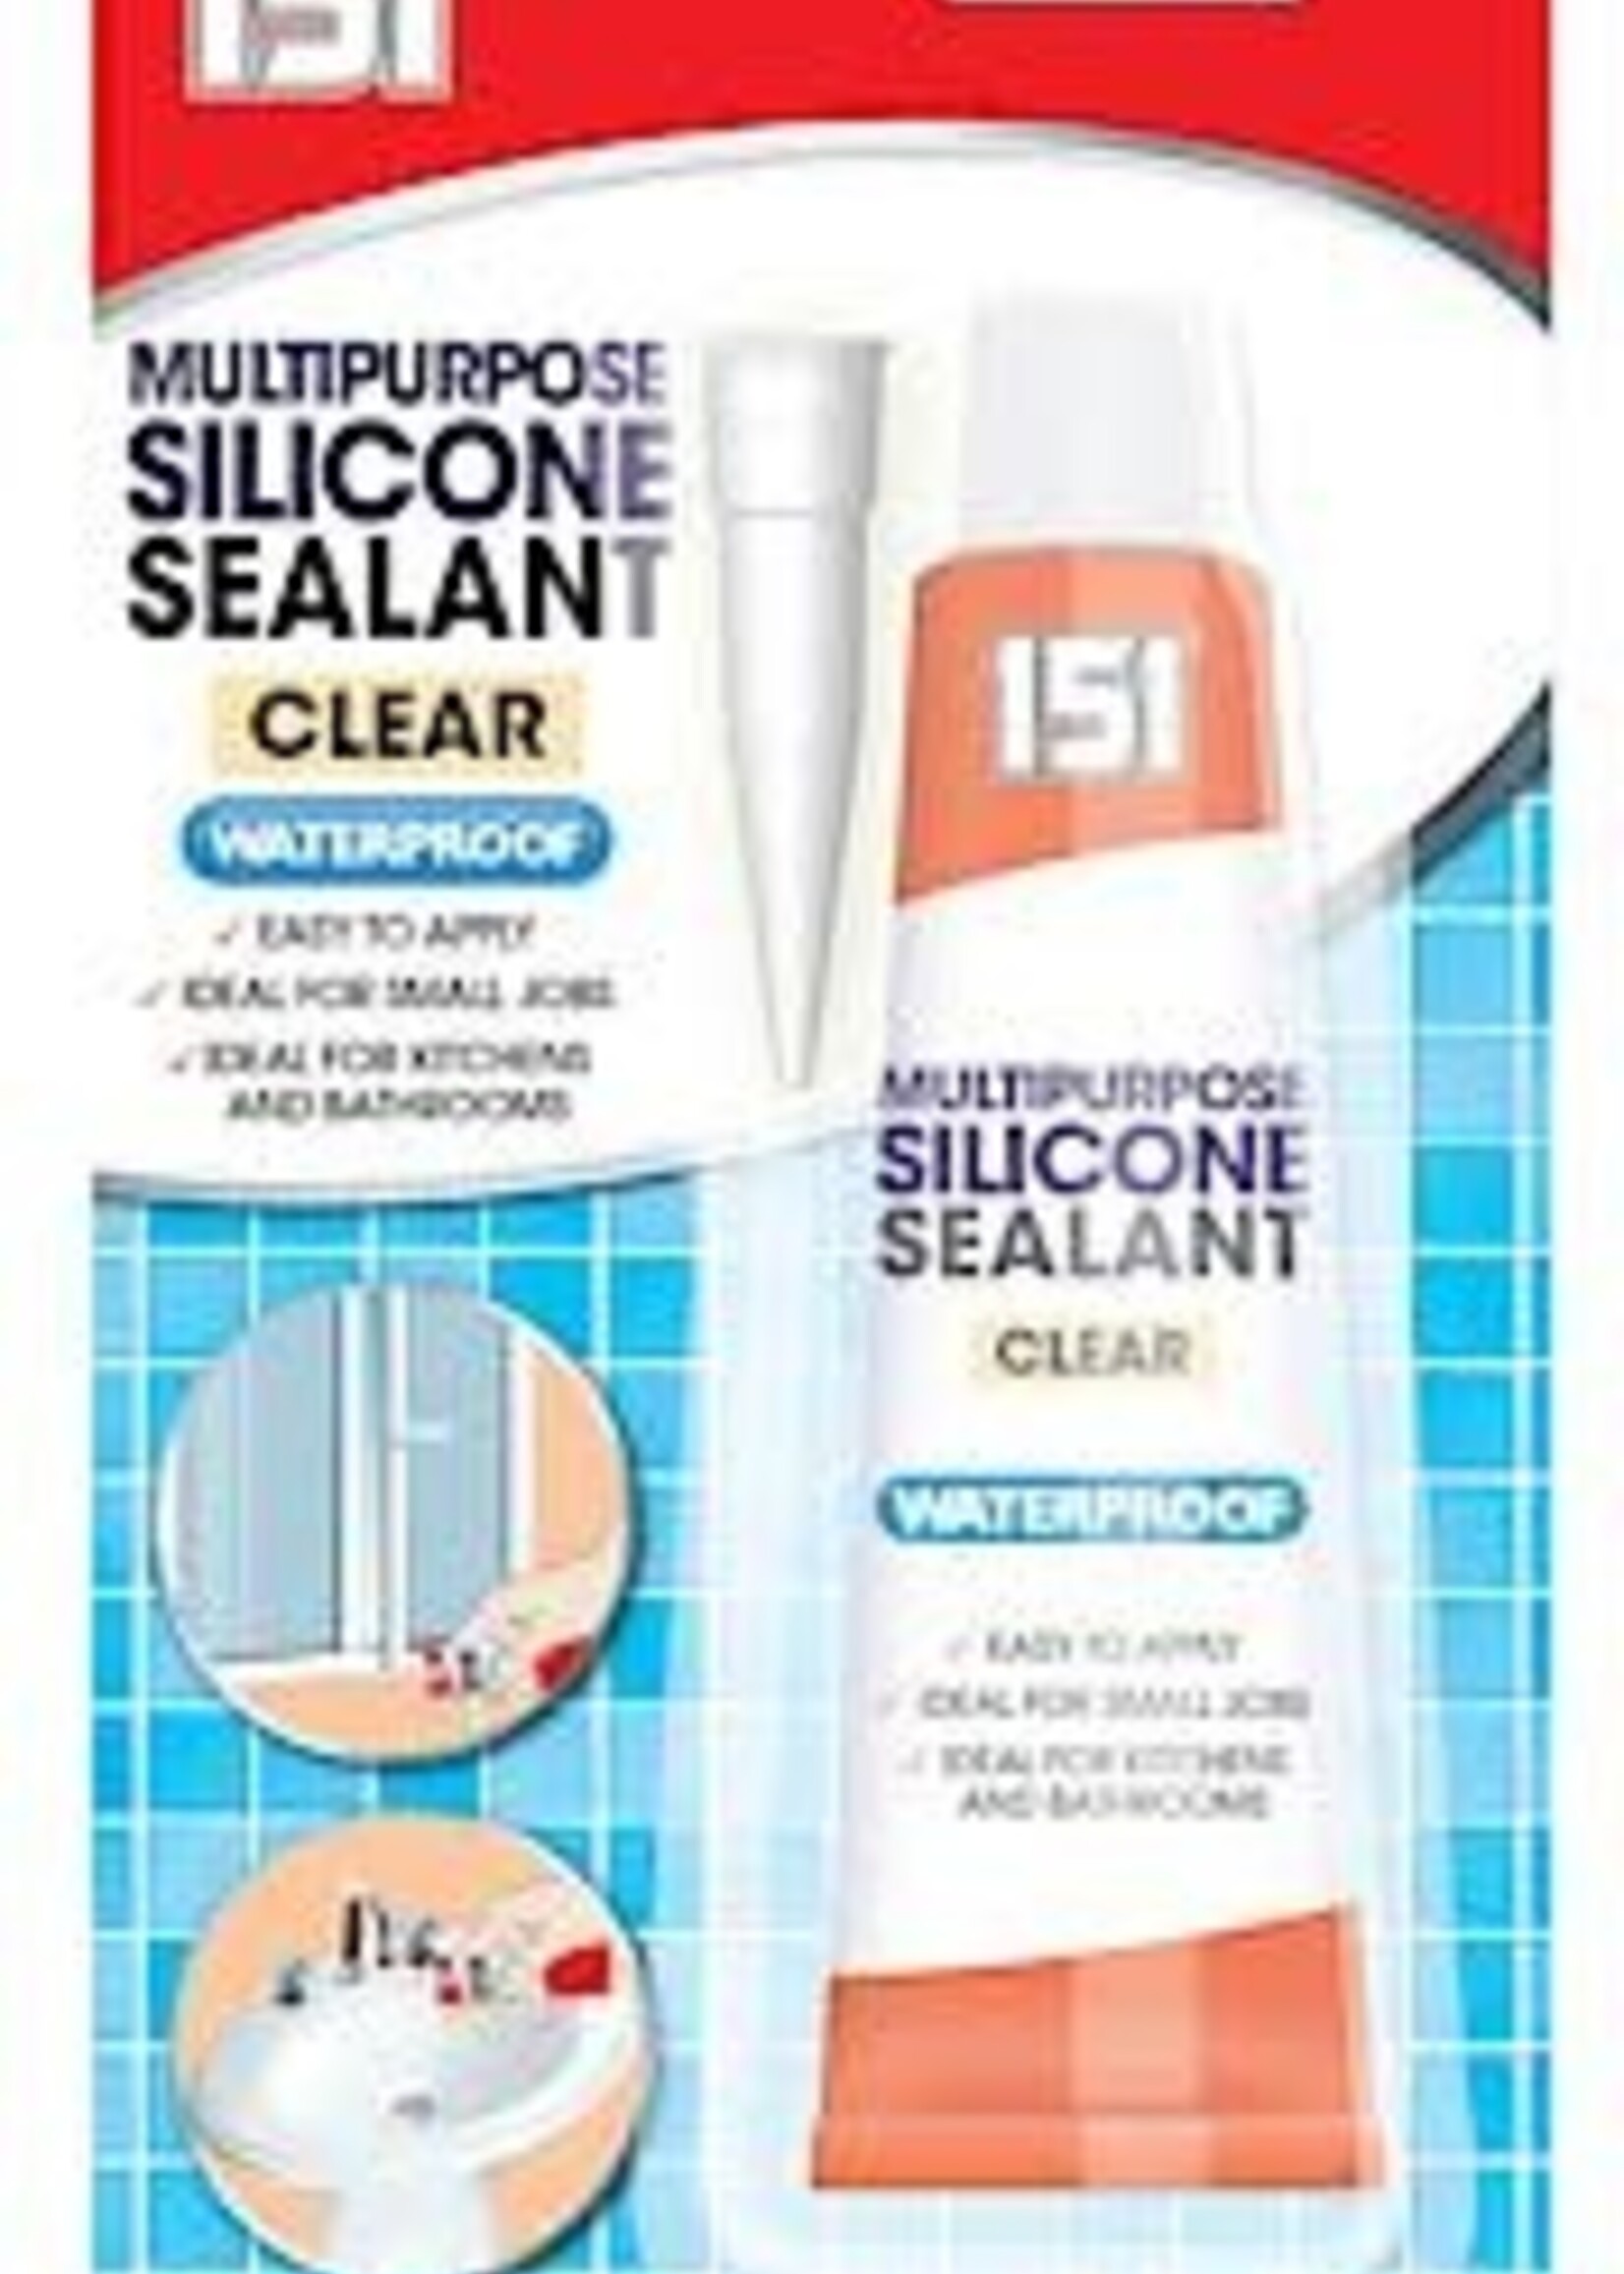 151 Silicone Sealant White or Clear